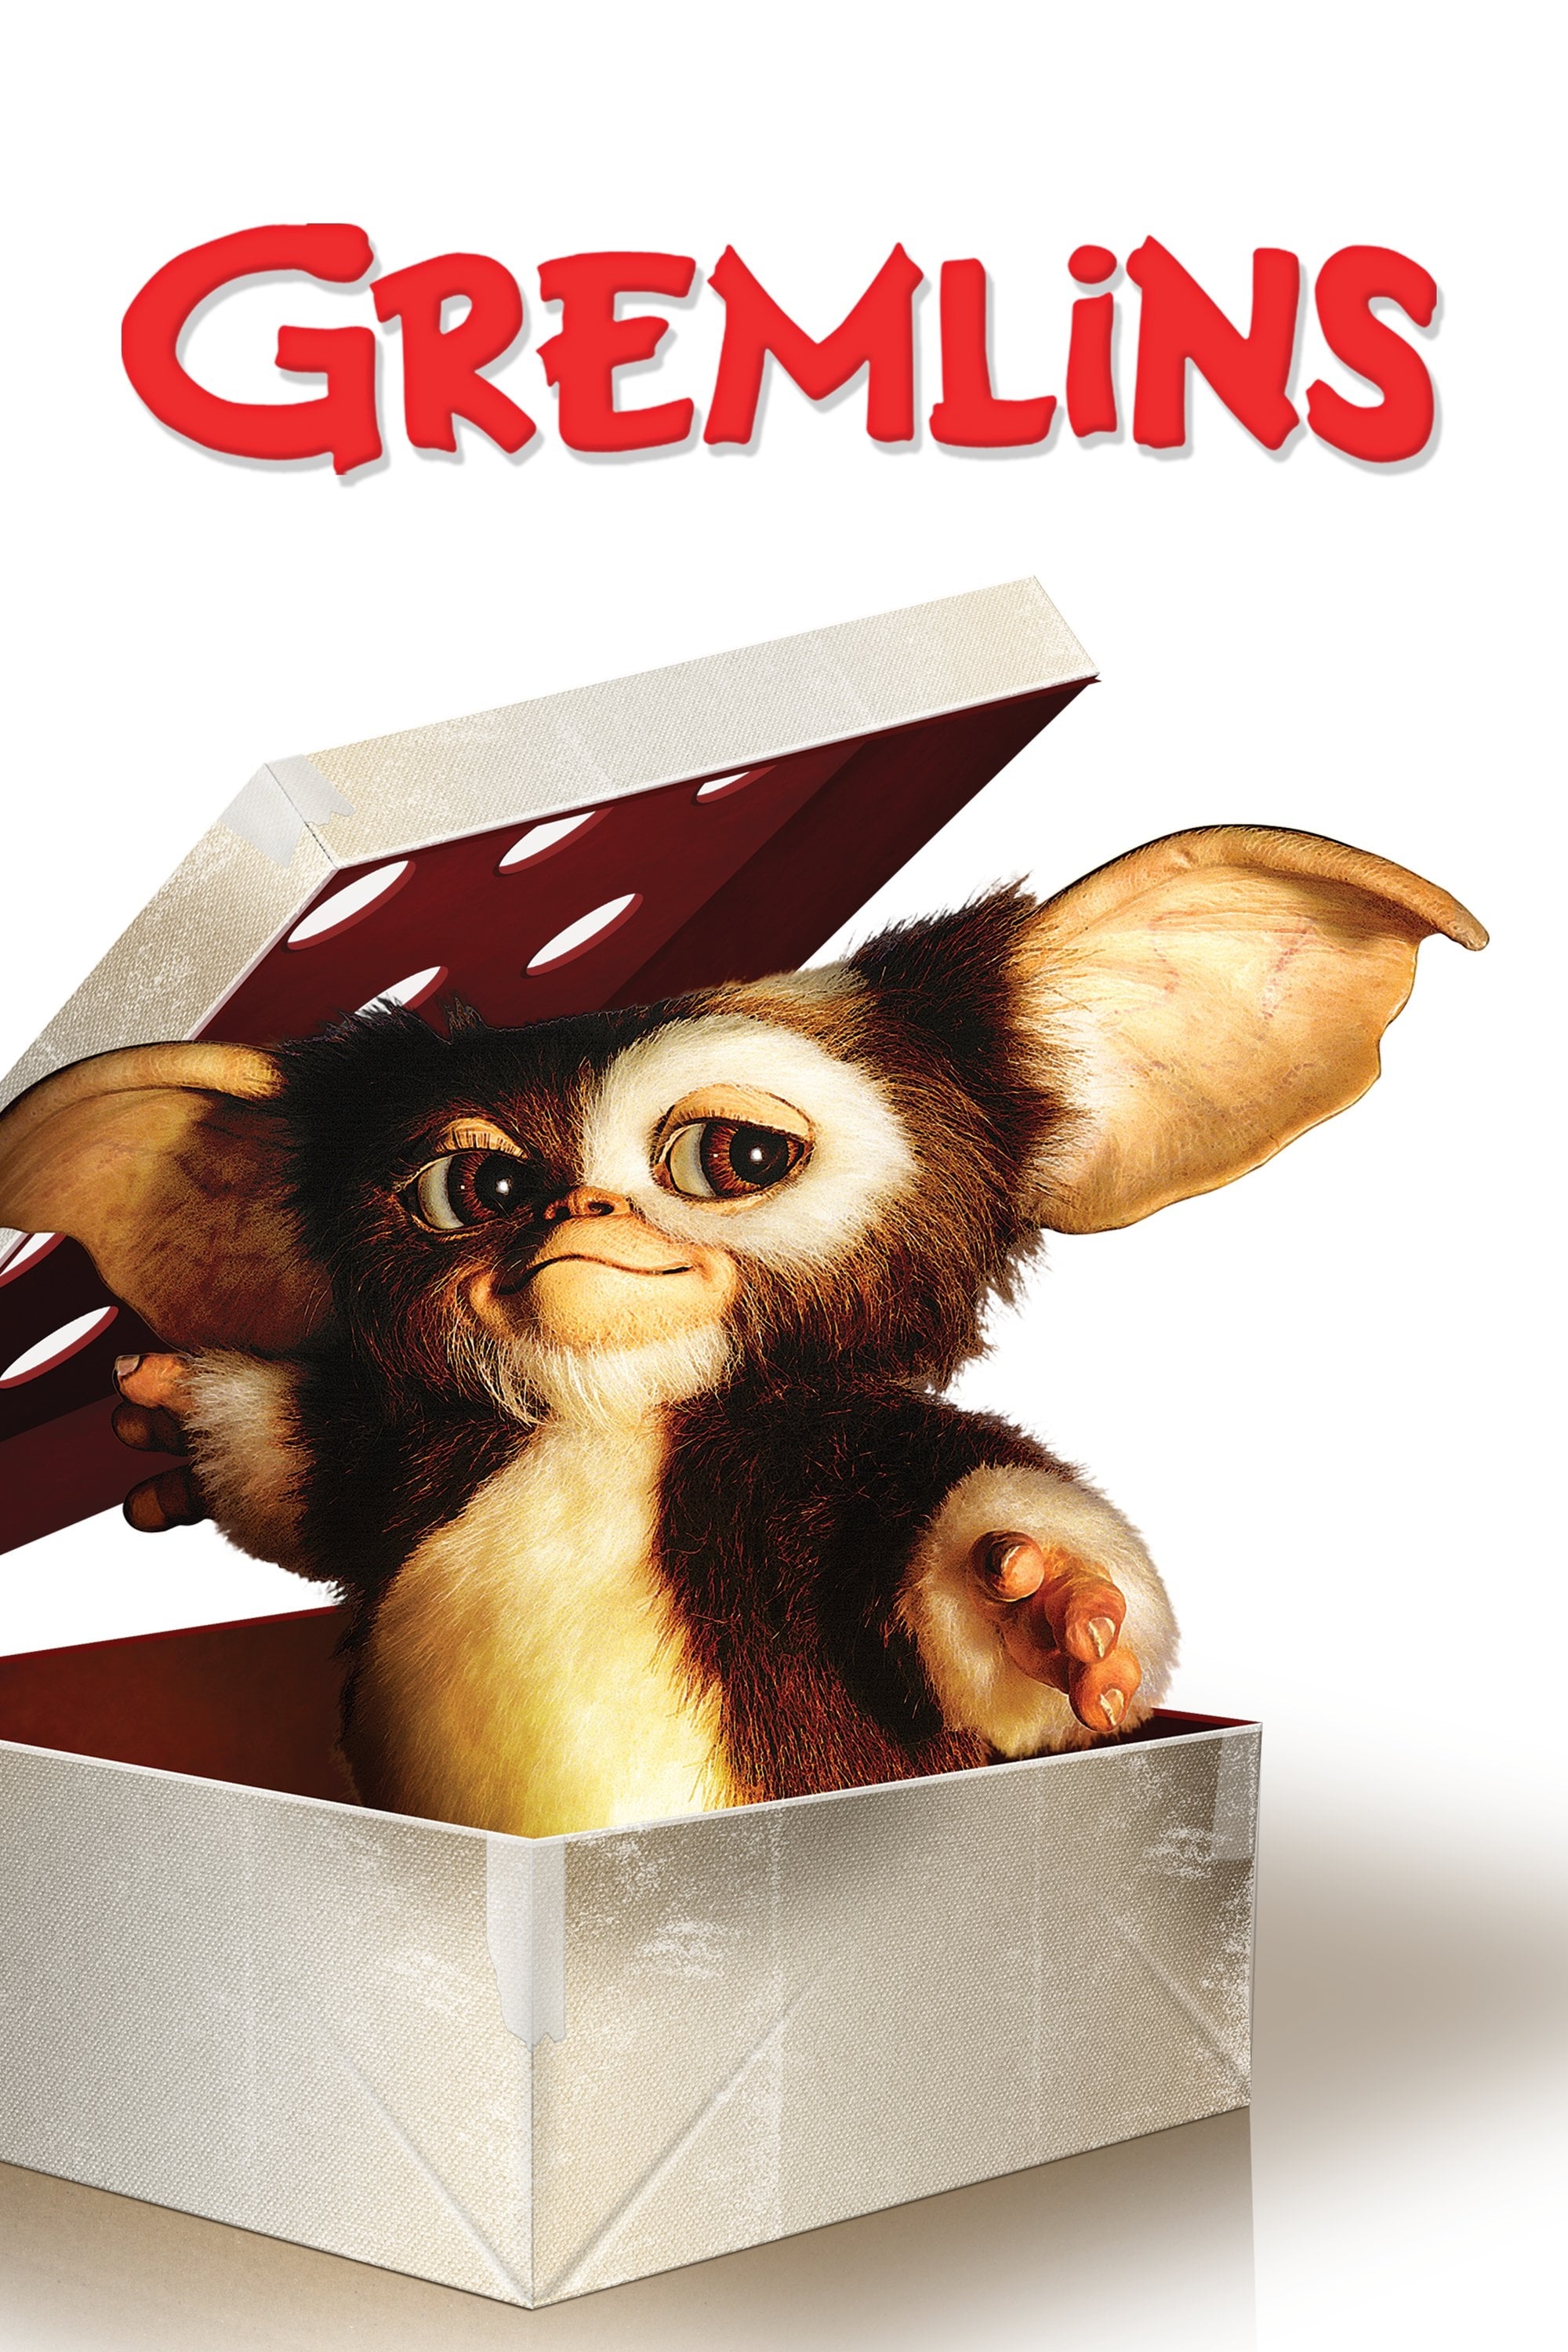 Theatrical poster for Gremlins